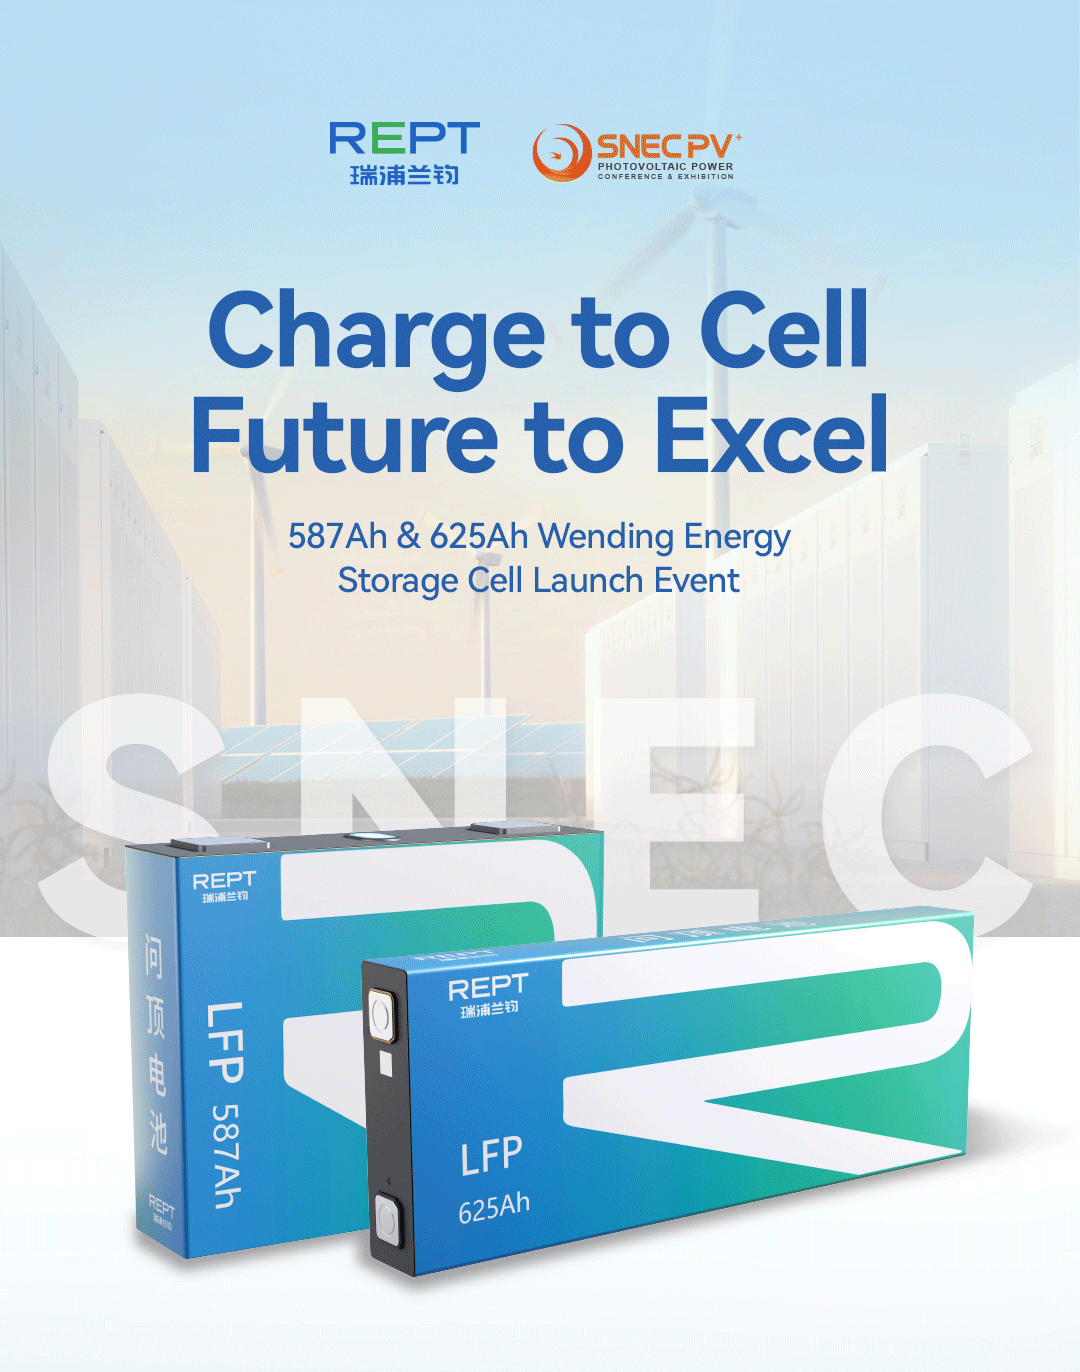 charge to cell future to excel | 587ah & 625ah wending energy storage cell launch event